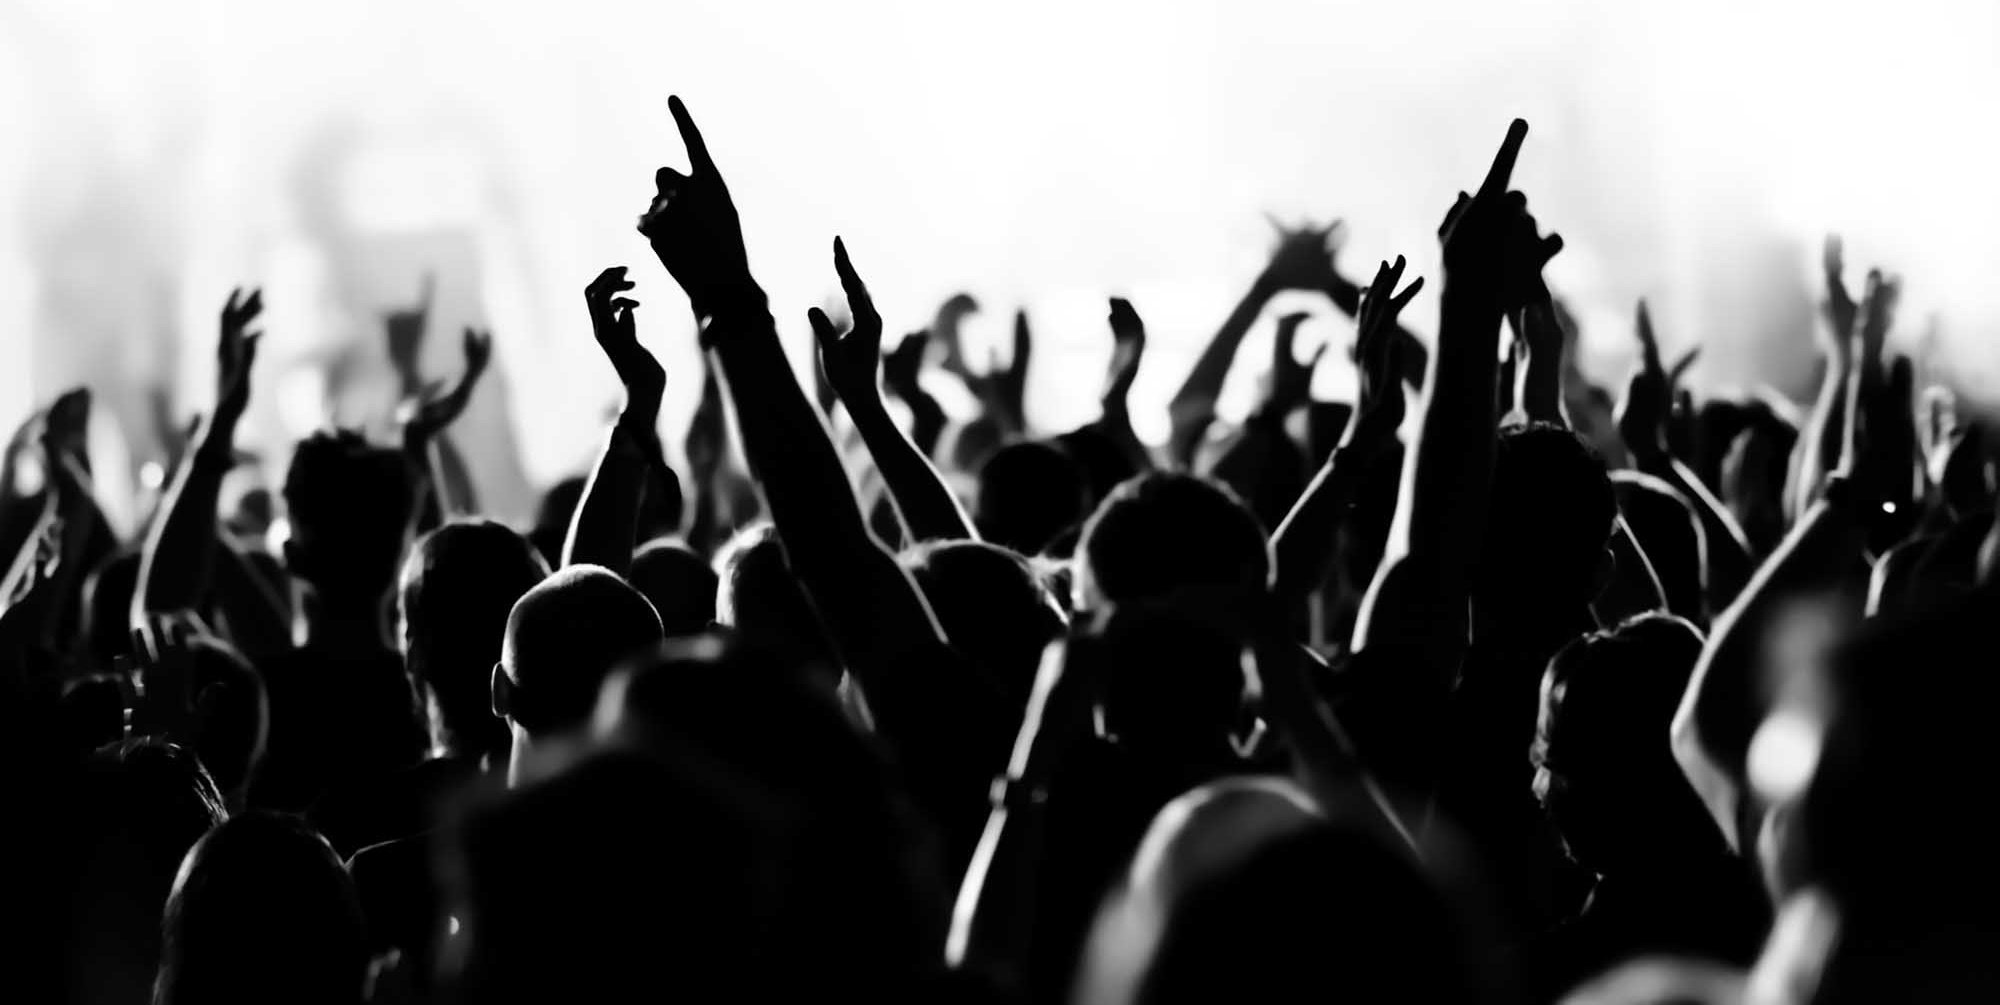 Concert Attendees Experience